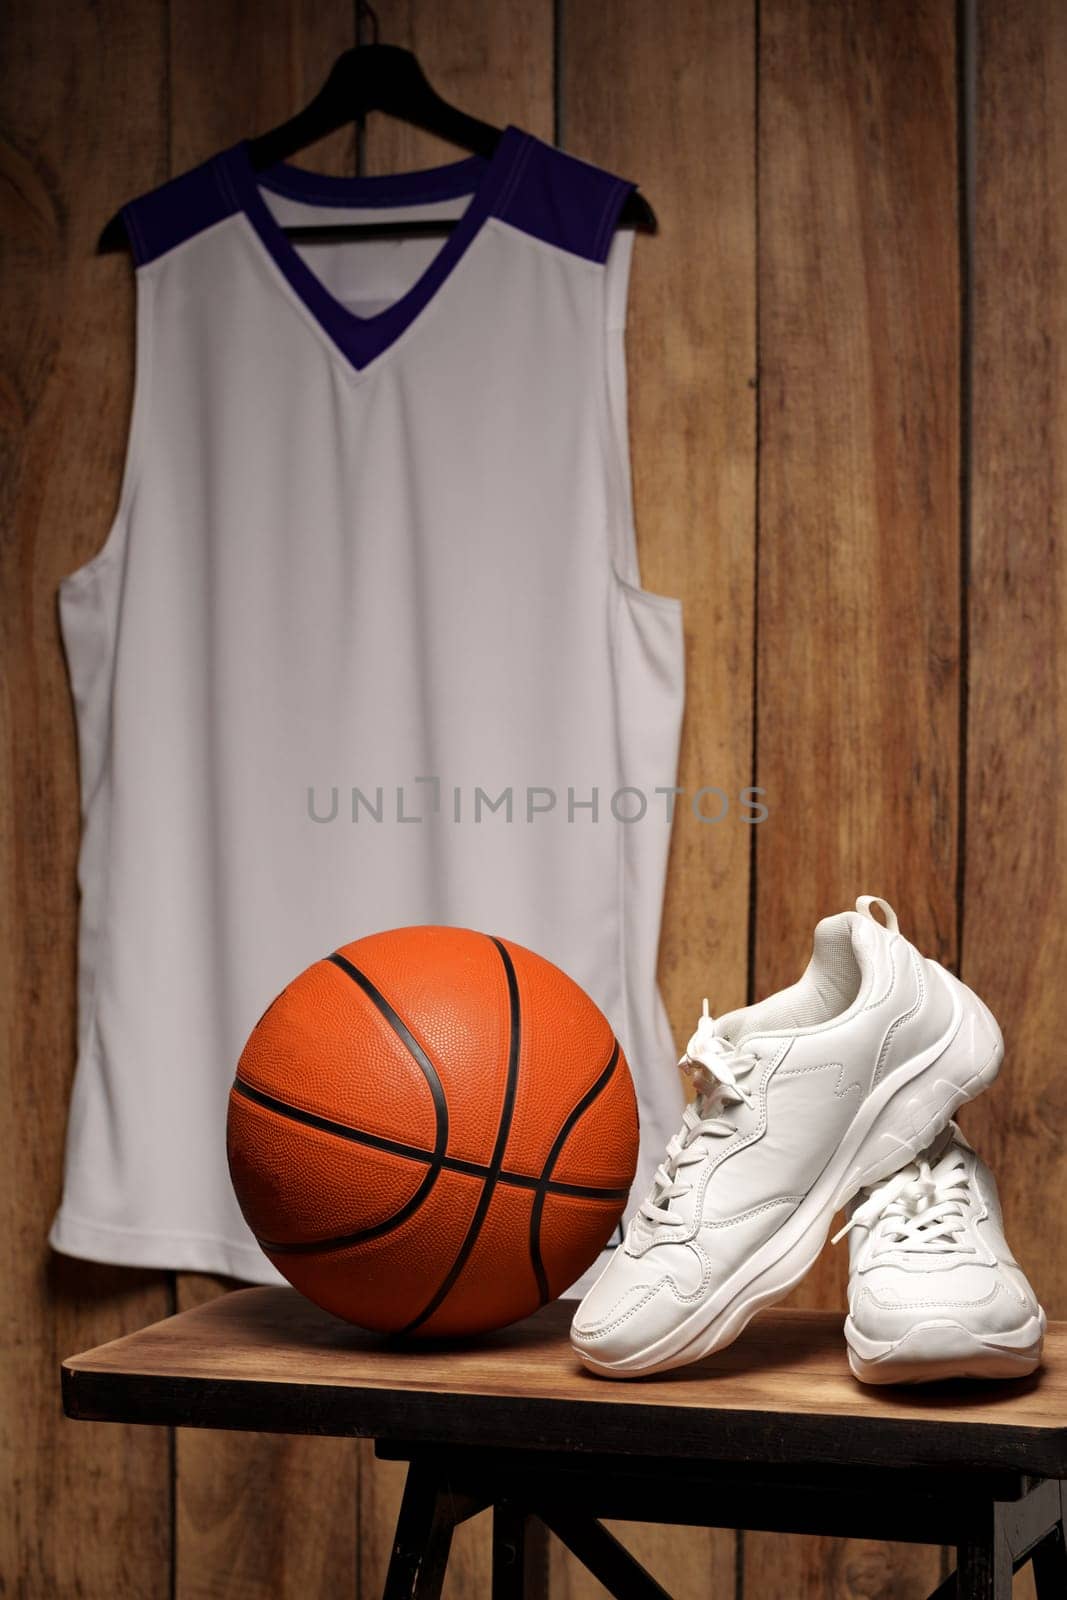 White sneakers and basketball ball against wooden background by Fabrikasimf